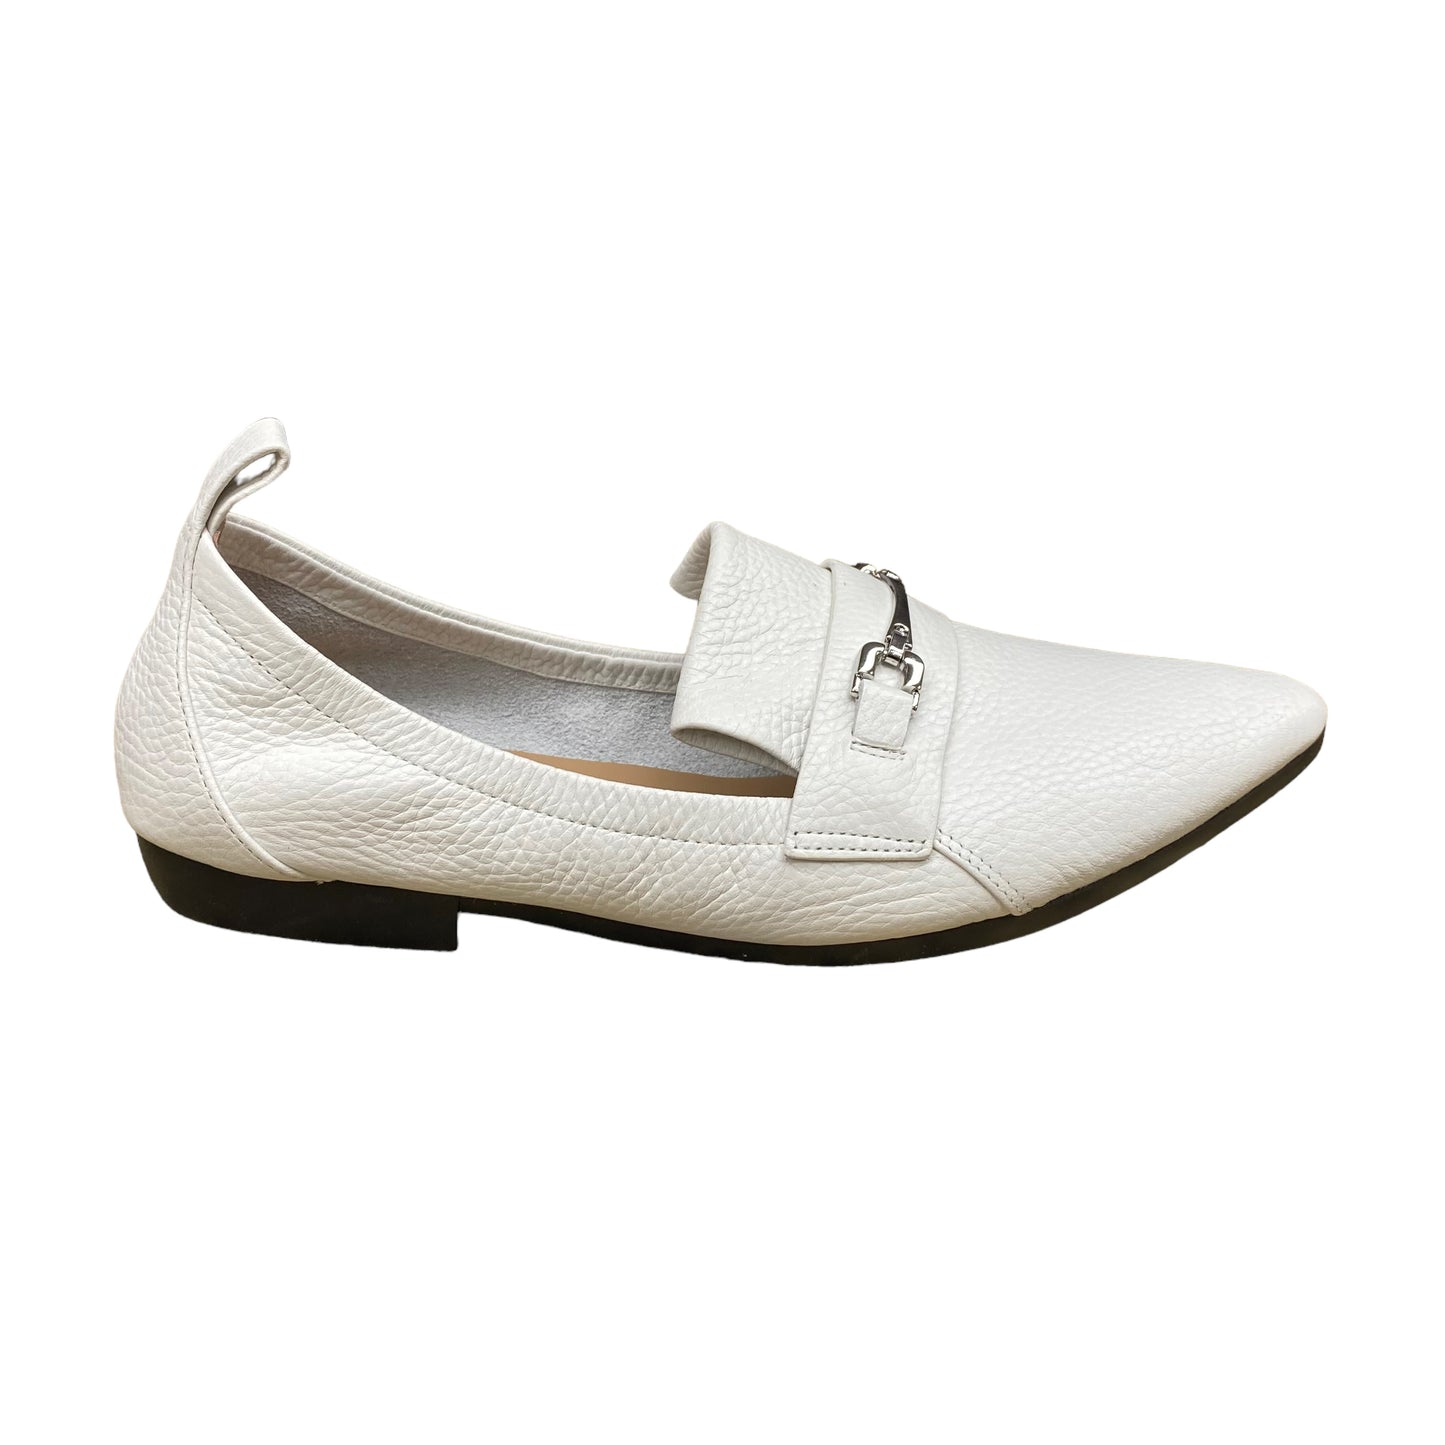 Shoes Flats By Linea Paolo  Size: 7